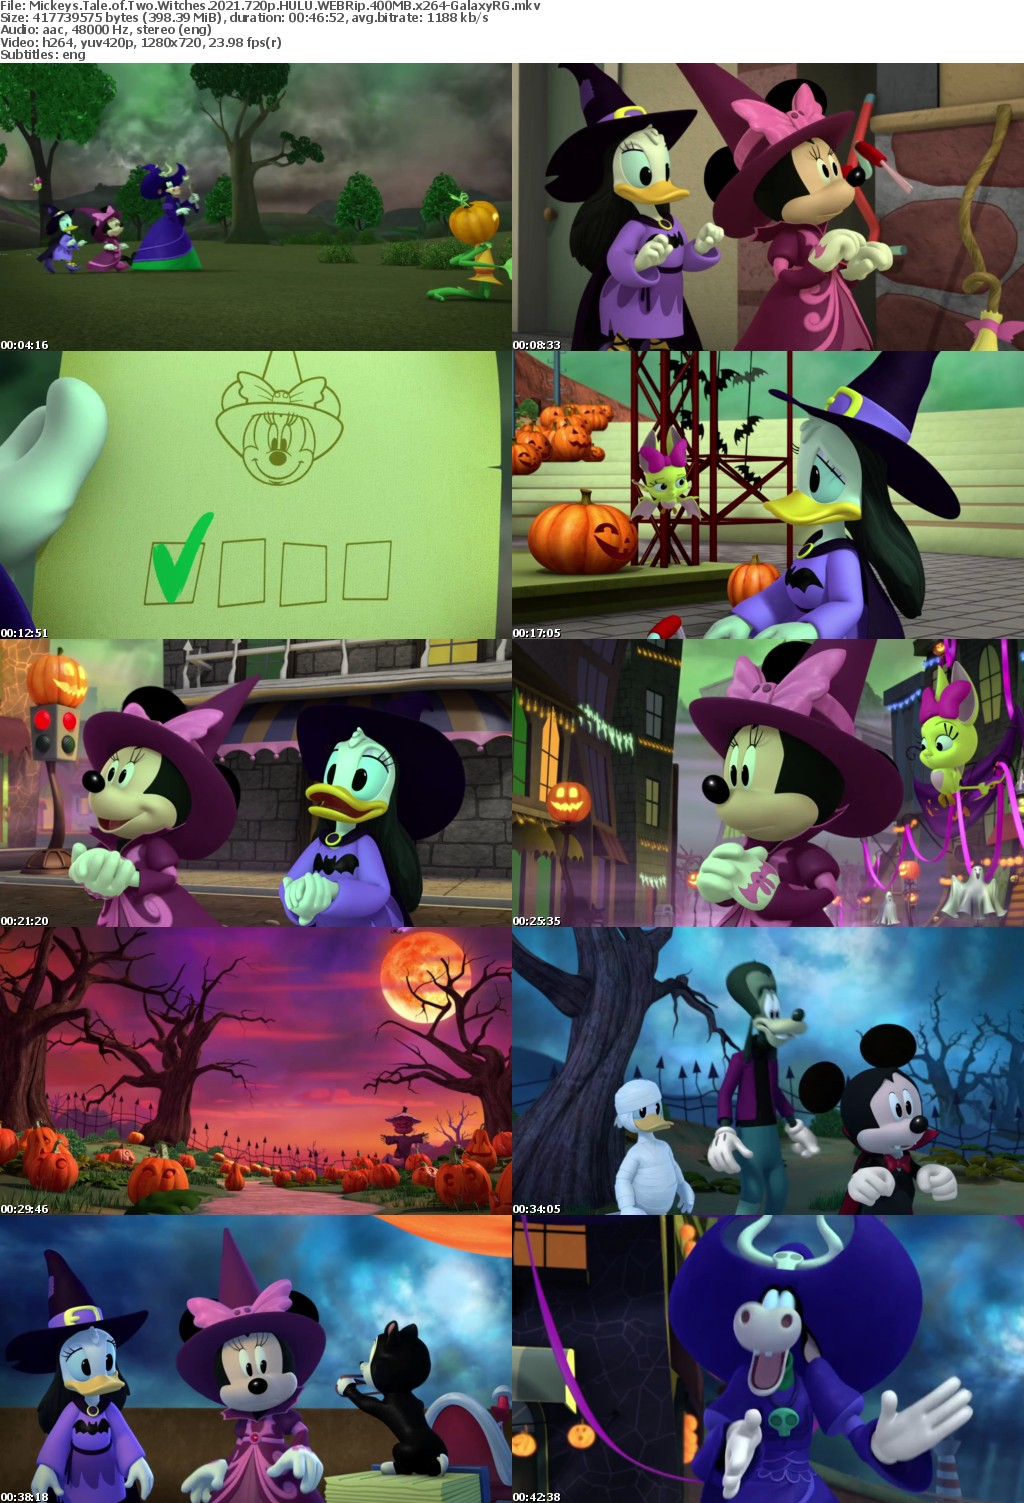 Mickeys Tale of Two Witches 2021 720p HULU WEBRip 400MB x264-GalaxyRG